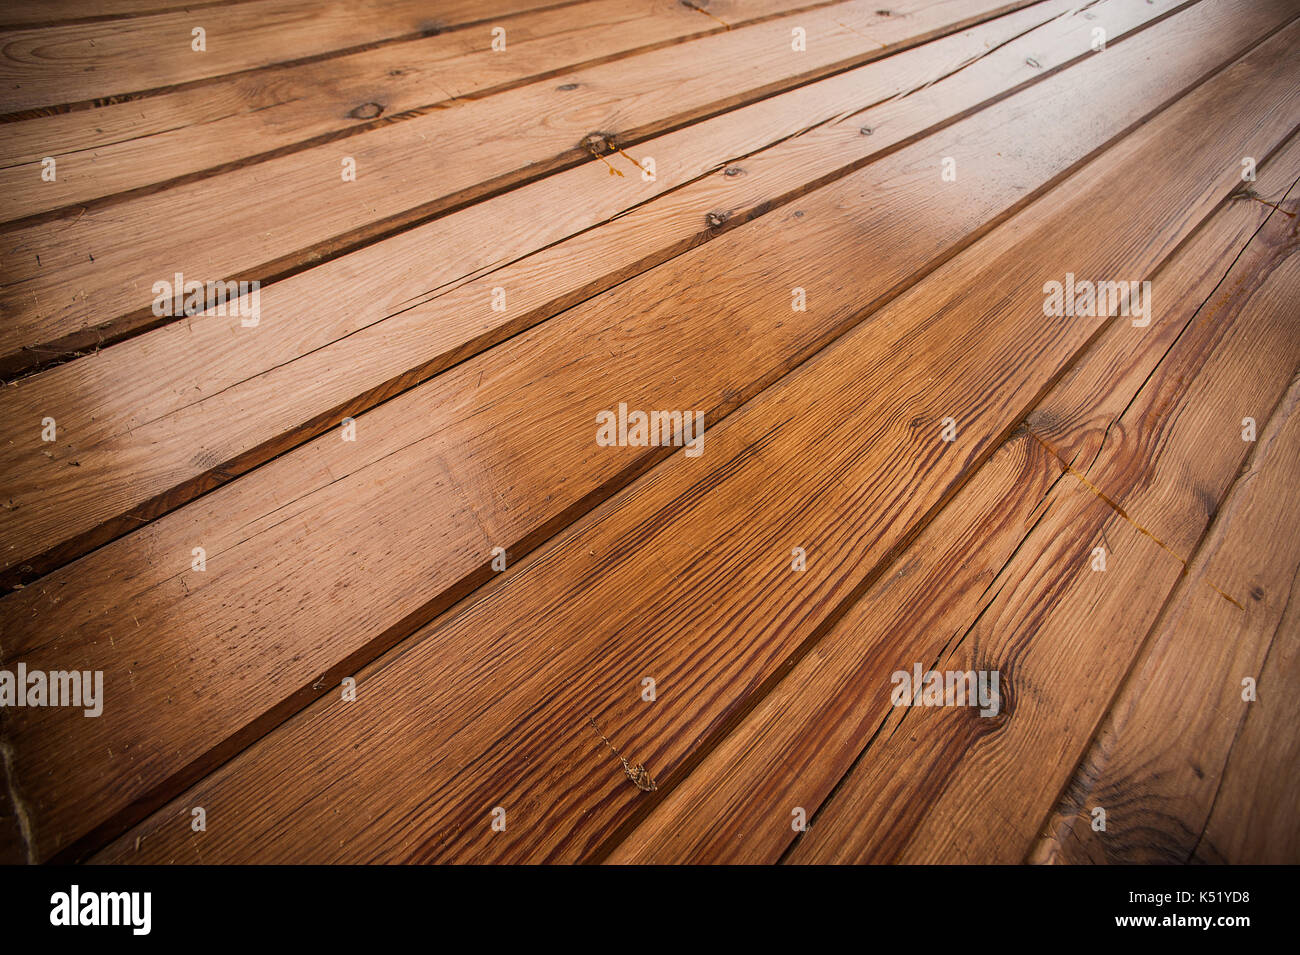 Texture - wooden boards brown color. Texture of a wooden wall from a bar. different view Stock Photo